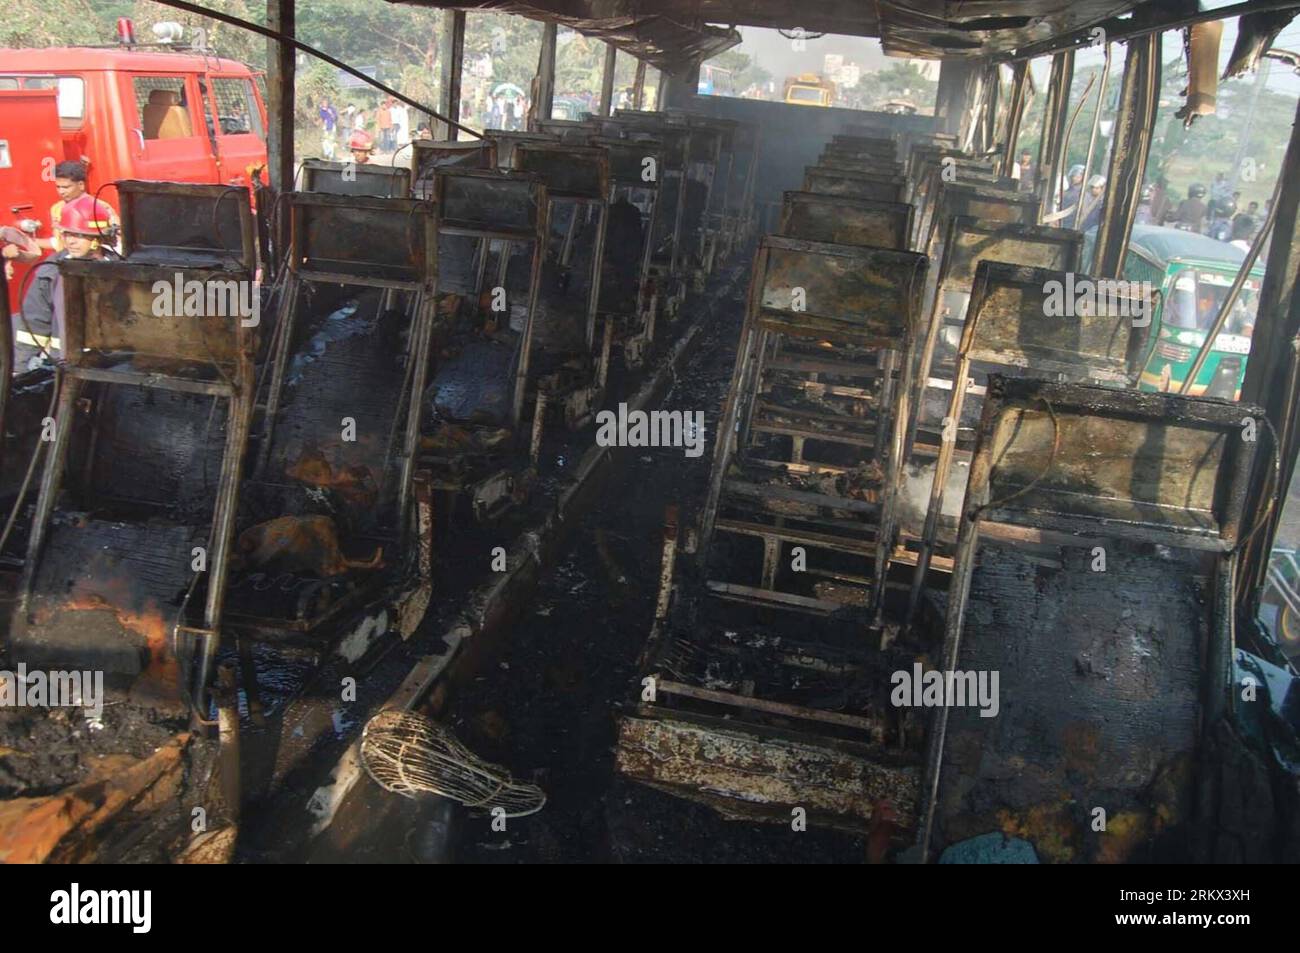 Bildnummer: 58870462  Datum: 04.12.2012  Copyright: imago/Xinhua (121204) -- DHAKA, Dec. 4, 2012 (Xinhua) -- Photo taken on Dec. 4, 2012 shows the inside of a burnt bus done by activists of the Jamaat-e-Islami during a country-wide dawn-to-dusk hartal in Dhaka, capital of Bangladesh. A one-day hartal by the largest Islamist party Jamaat-e-Islami demanding release of its leaders who face charges of war crimes, threw normal life out of gear across Bangladesh Tuesday. (Xinhua) BANGLADESH-DHAKA-HARTAL PUBLICATIONxNOTxINxCHN Streik Ausschreitungen Demo Gesellschaft x0x xds 2012 quer      58870462 D Stock Photo